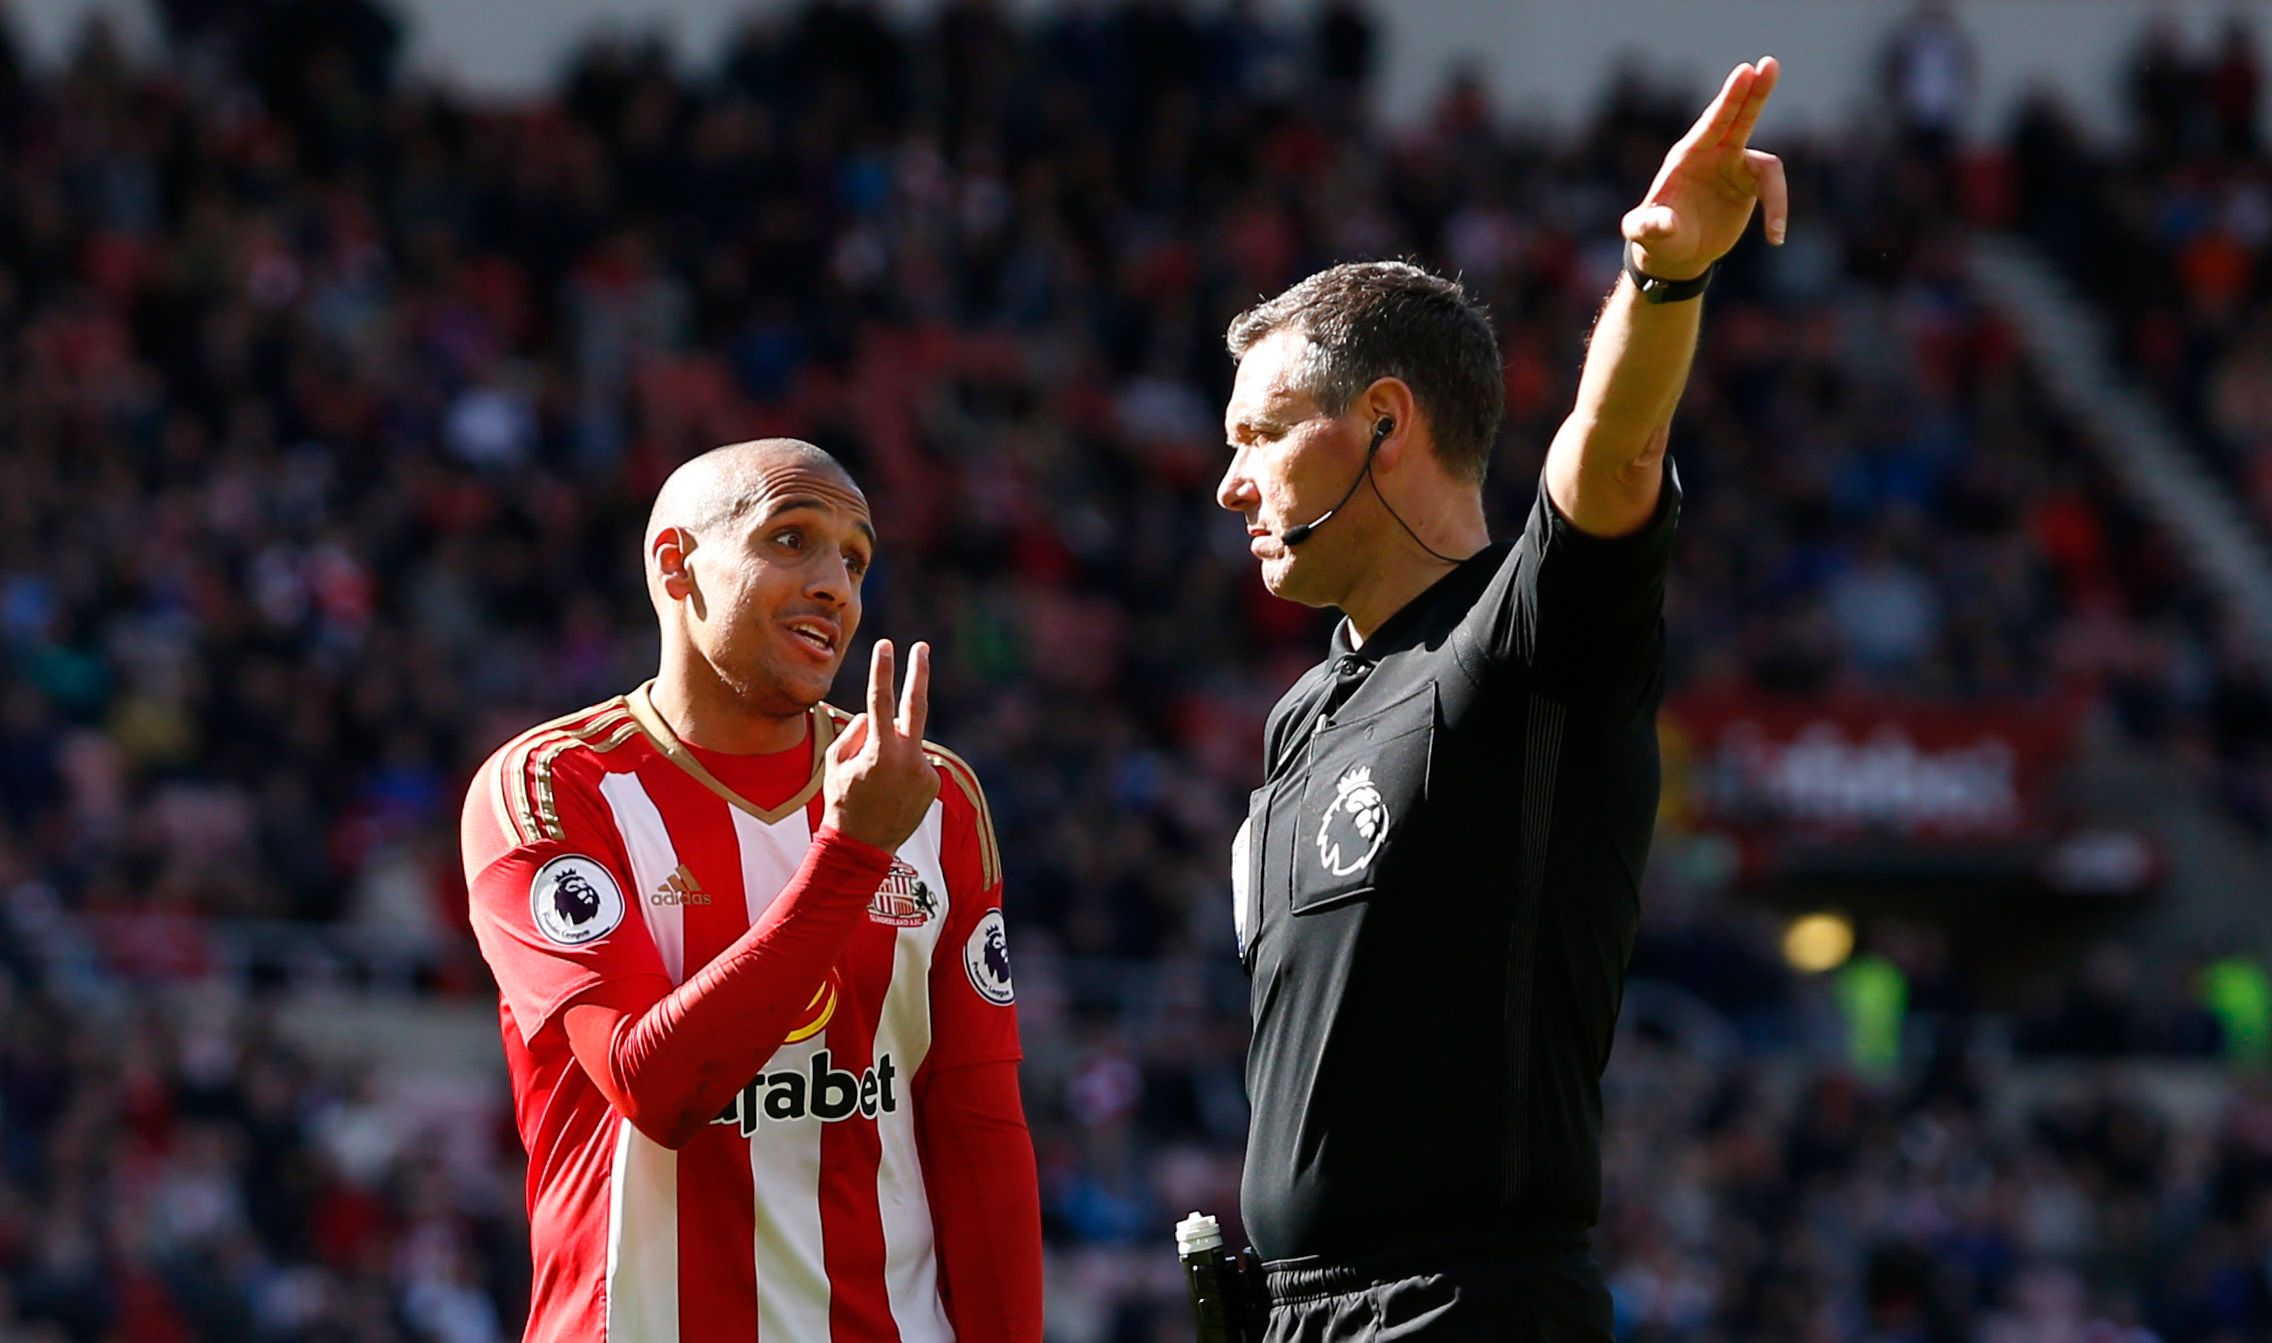 Britain Soccer Football - Sunderland v West Ham United - Premier League - Stadium of Light - 15/4/17 Sunderland's Wahbi Khazri speaks to referee Andre Marriner Action Images via Reuters / Ed Sykes Livepic EDITORIAL USE ONLY. No use with unauthorized audio, video, data, fixture lists, club/league logos or "live" services. Online in-match use limited to 45 images, no video emulation. No use in betting, games or single club/league/player publications.  Please contact your account representative for